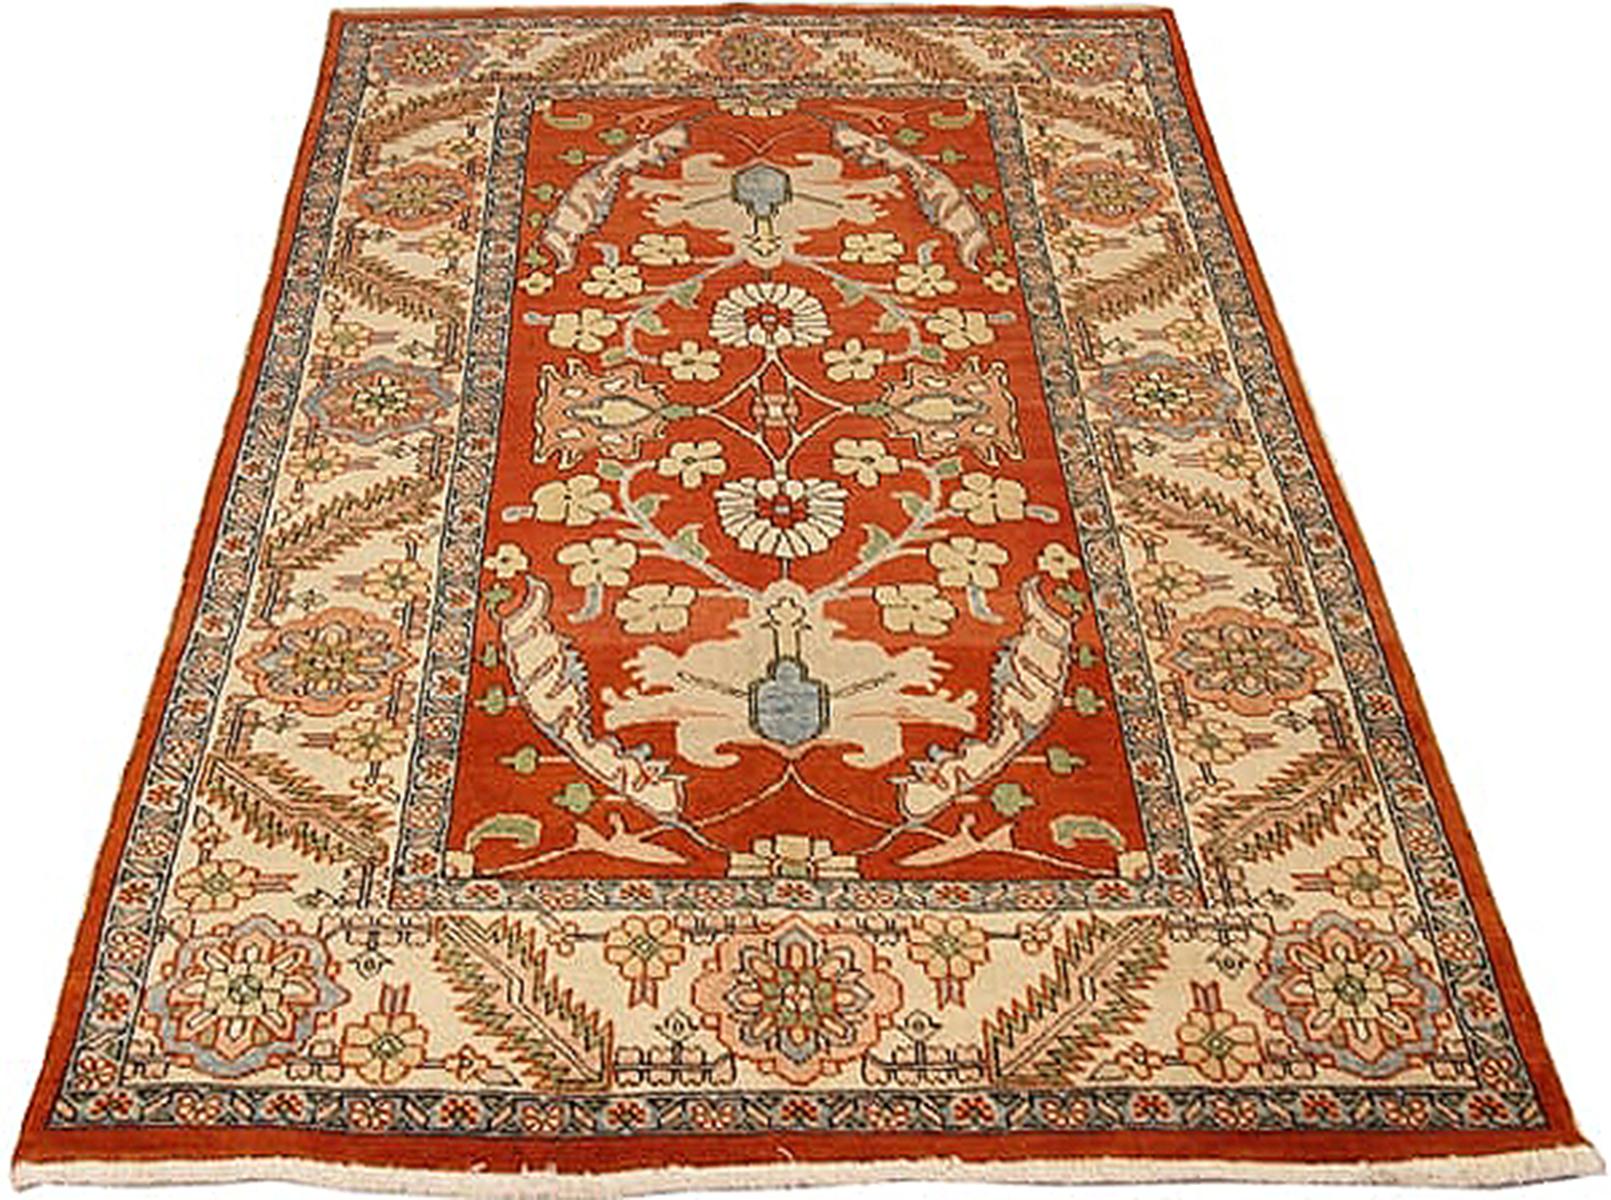 Vintage Persian rug handwoven from the finest sheep’s wool and colored with all-natural vegetable dyes that are safe for humans and pets. It’s a traditional Heriz design featuring a lovely ivory and red field covered with gray and beige floral and